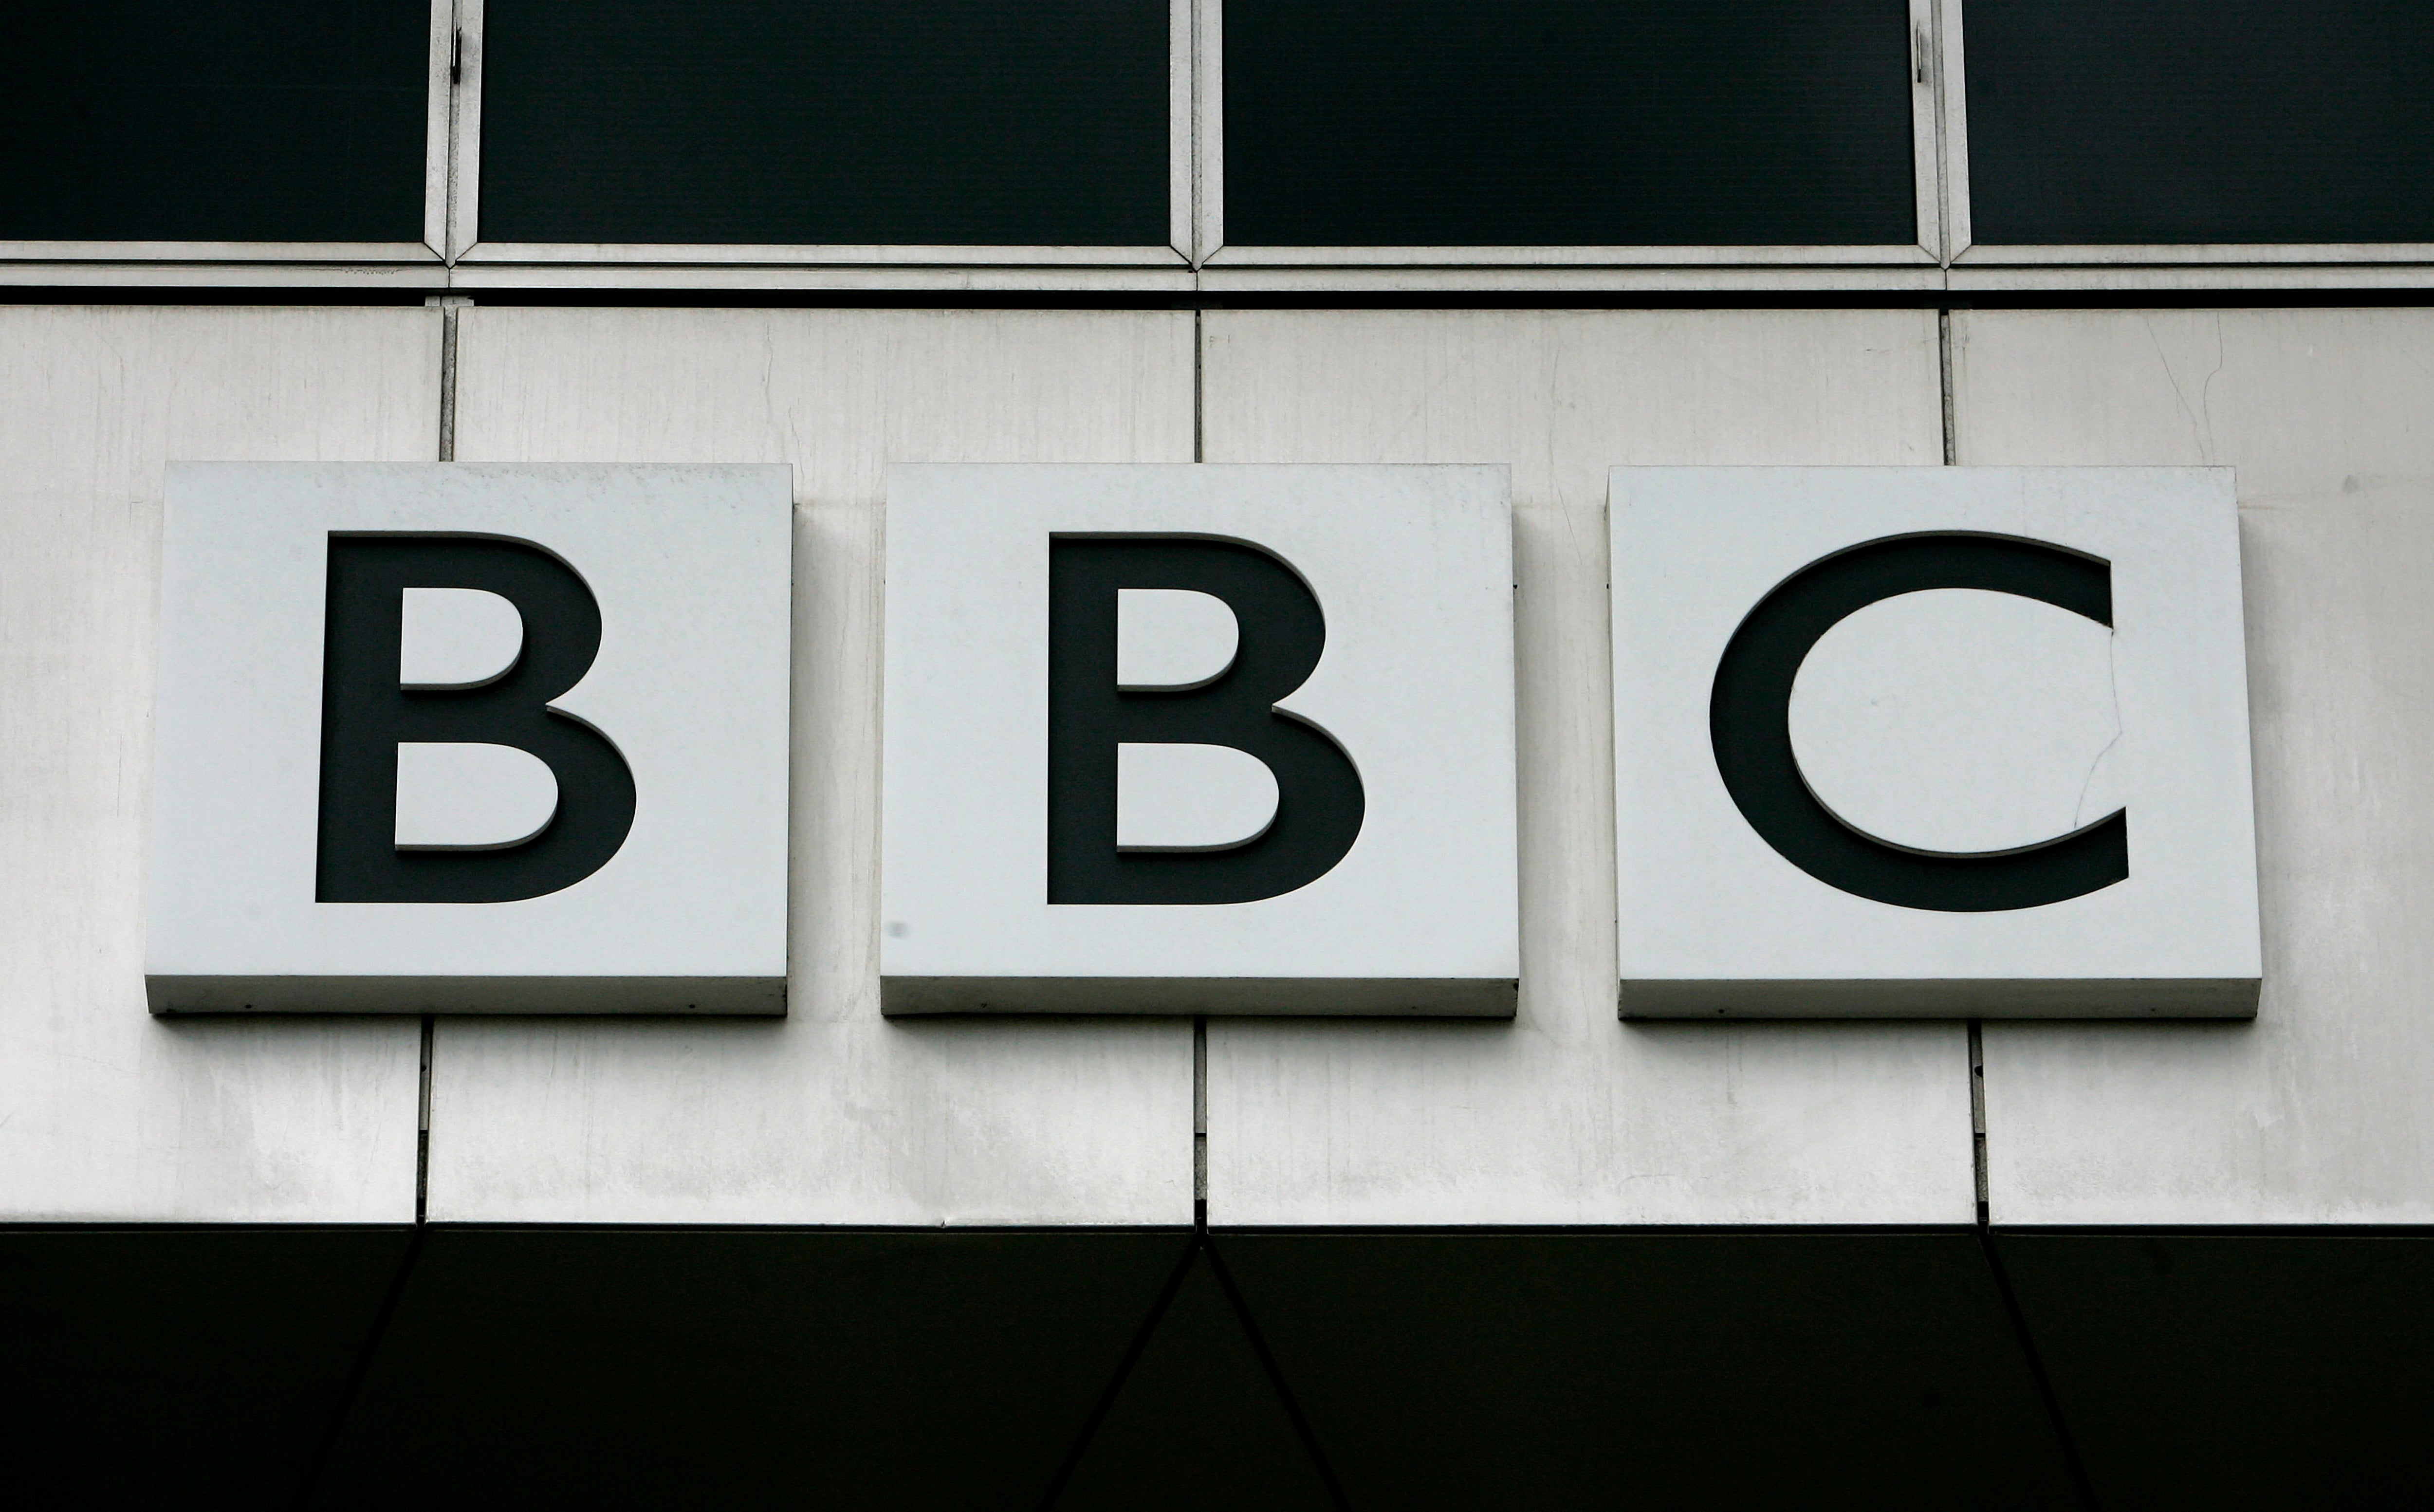 It wasn’t clear whether BBC reporters in China would be affected